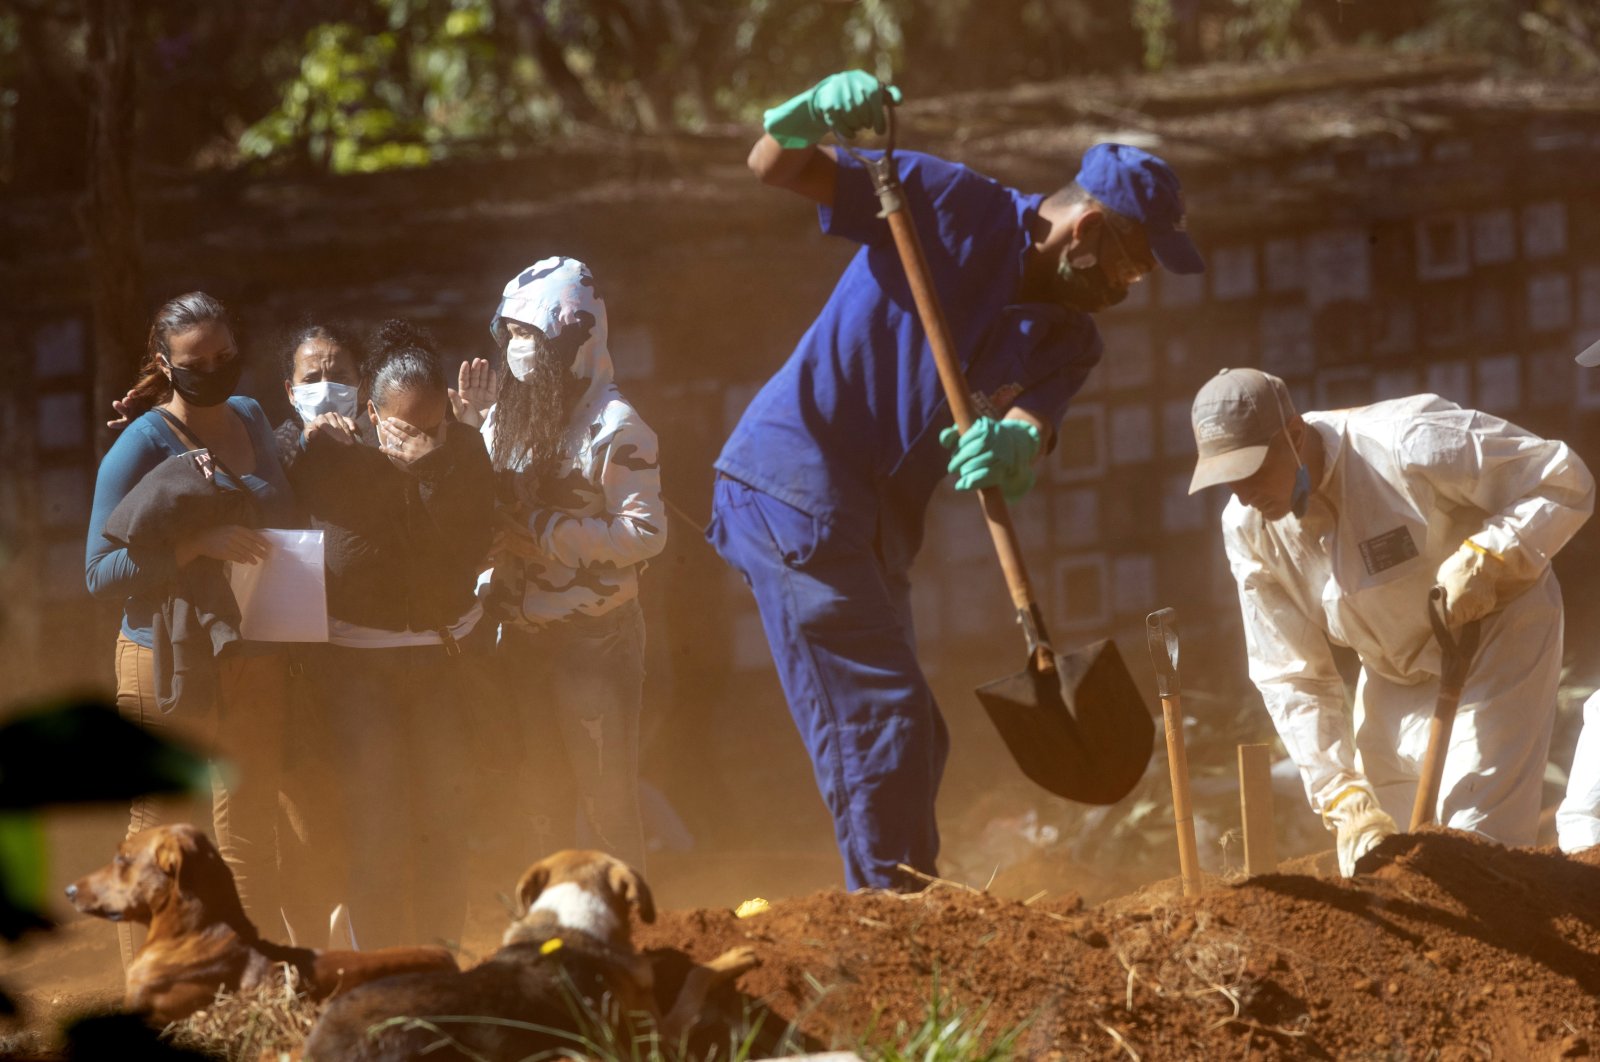 Relatives mourn as they watch cemetery workers shovel dirt over a coffin, at the Vila Formosa cemetery in Sao Paulo, Brazil, Thursday, May 28, 2020. (AP Photo/Andre Penner)